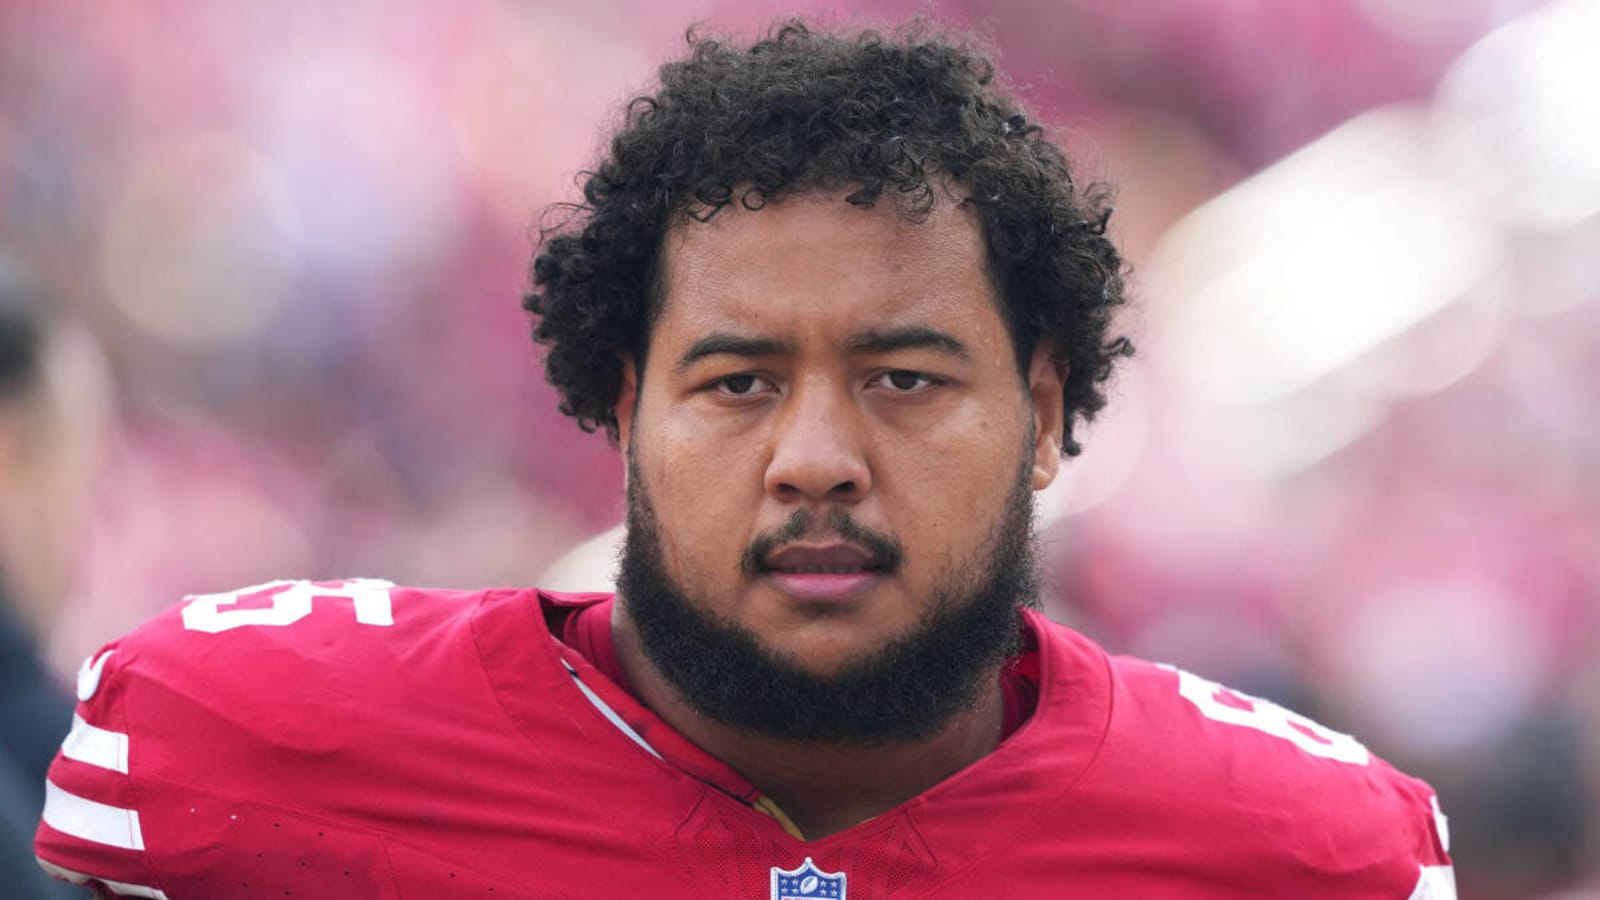 Latest NFL news puts millions of dollars into 49ers player&#39;s pocket